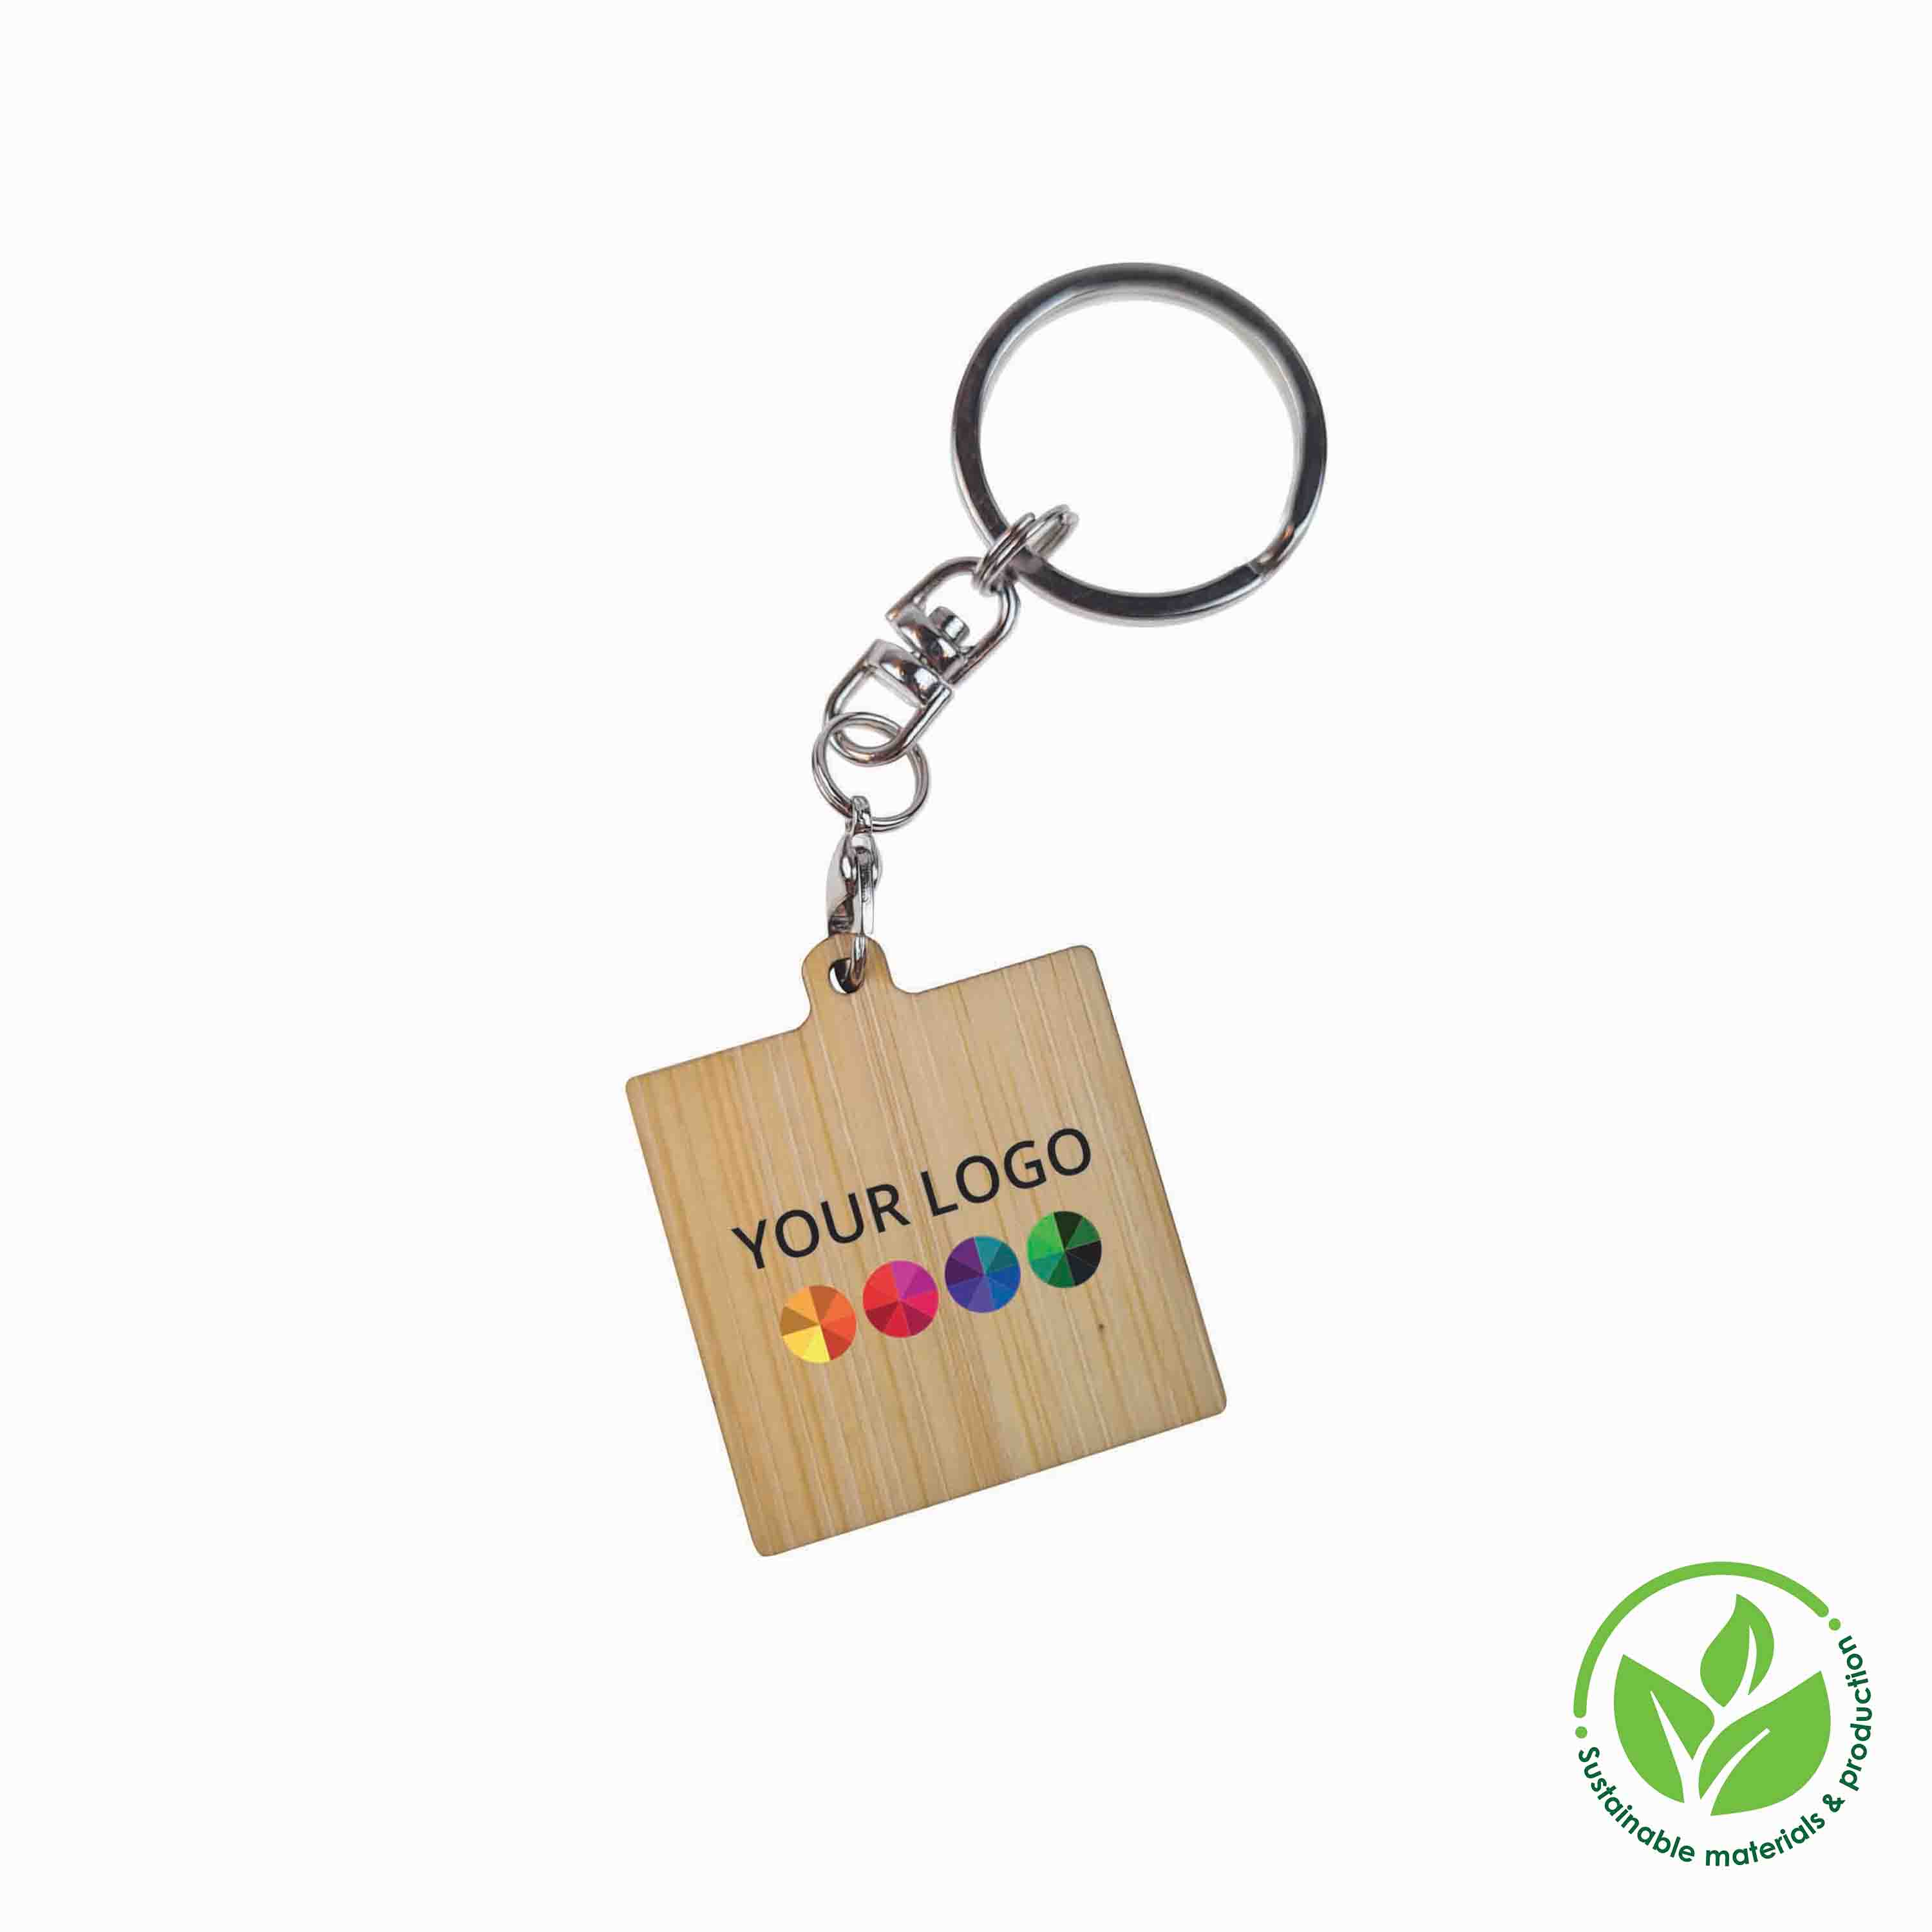 Key Ring Bamboo Square 30 mm, Print in full color